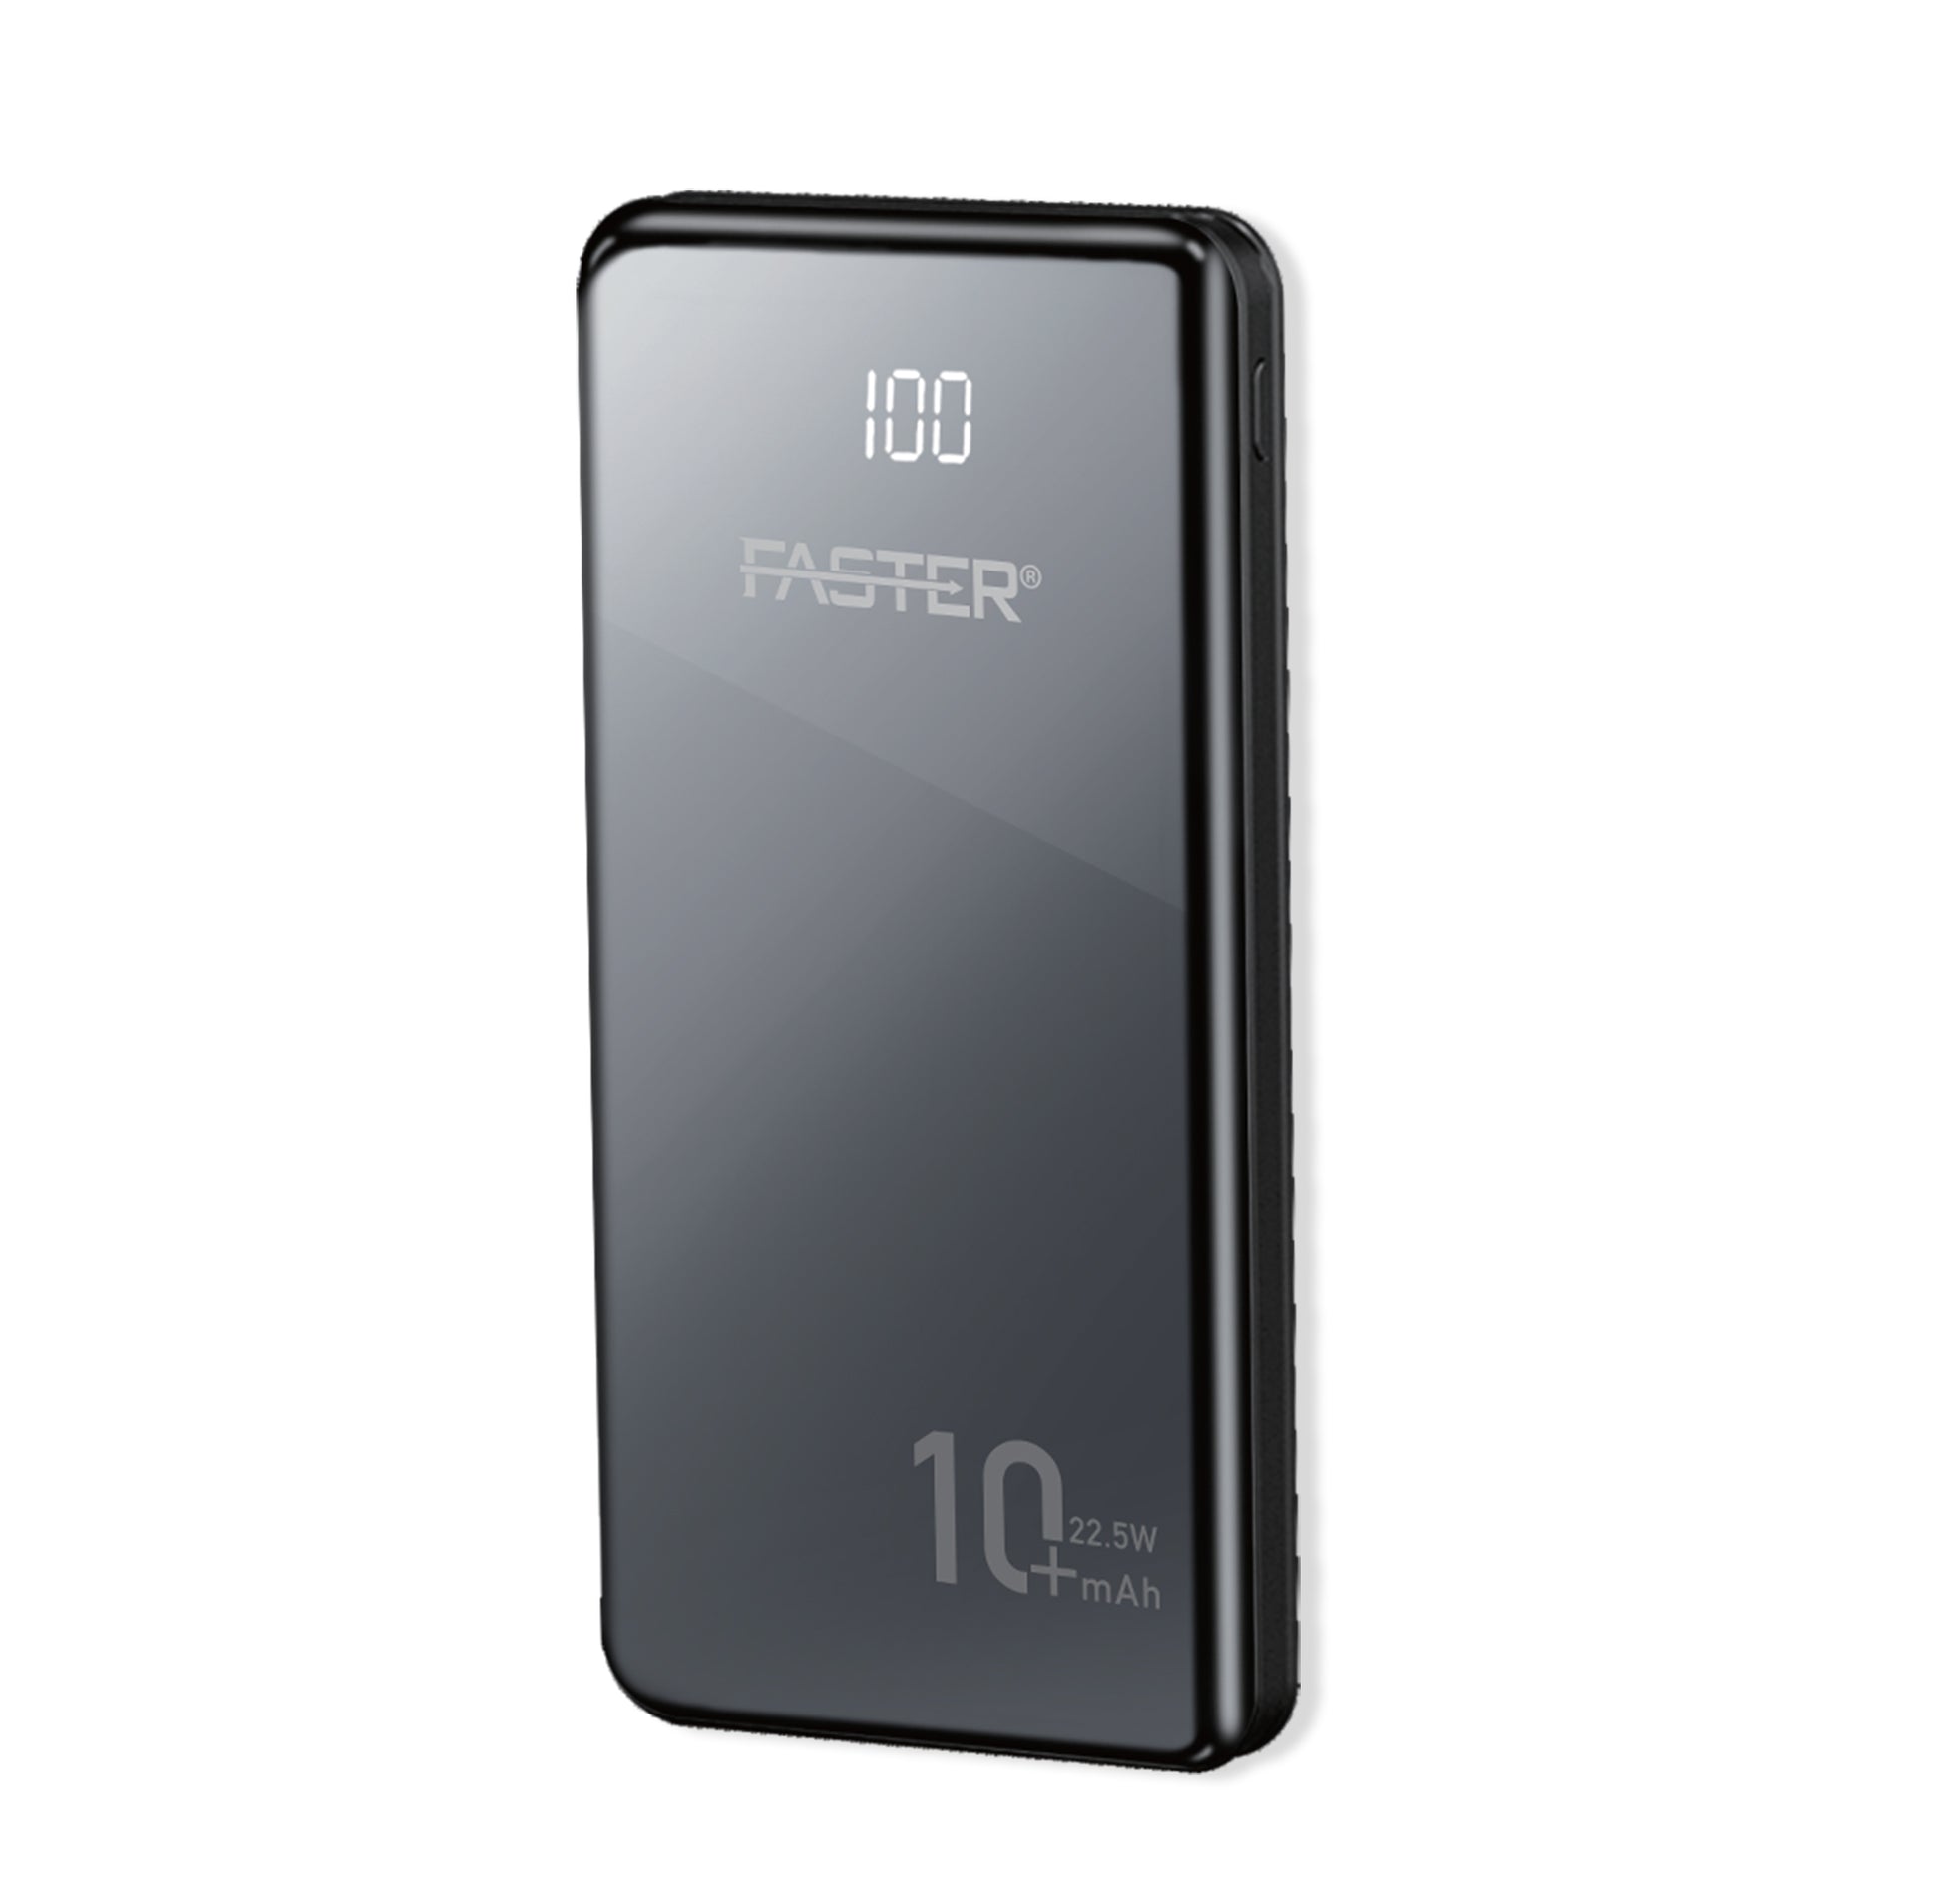 Faster A10-PD 10000 mAh Power Bank with LED Display Price in Pakistan